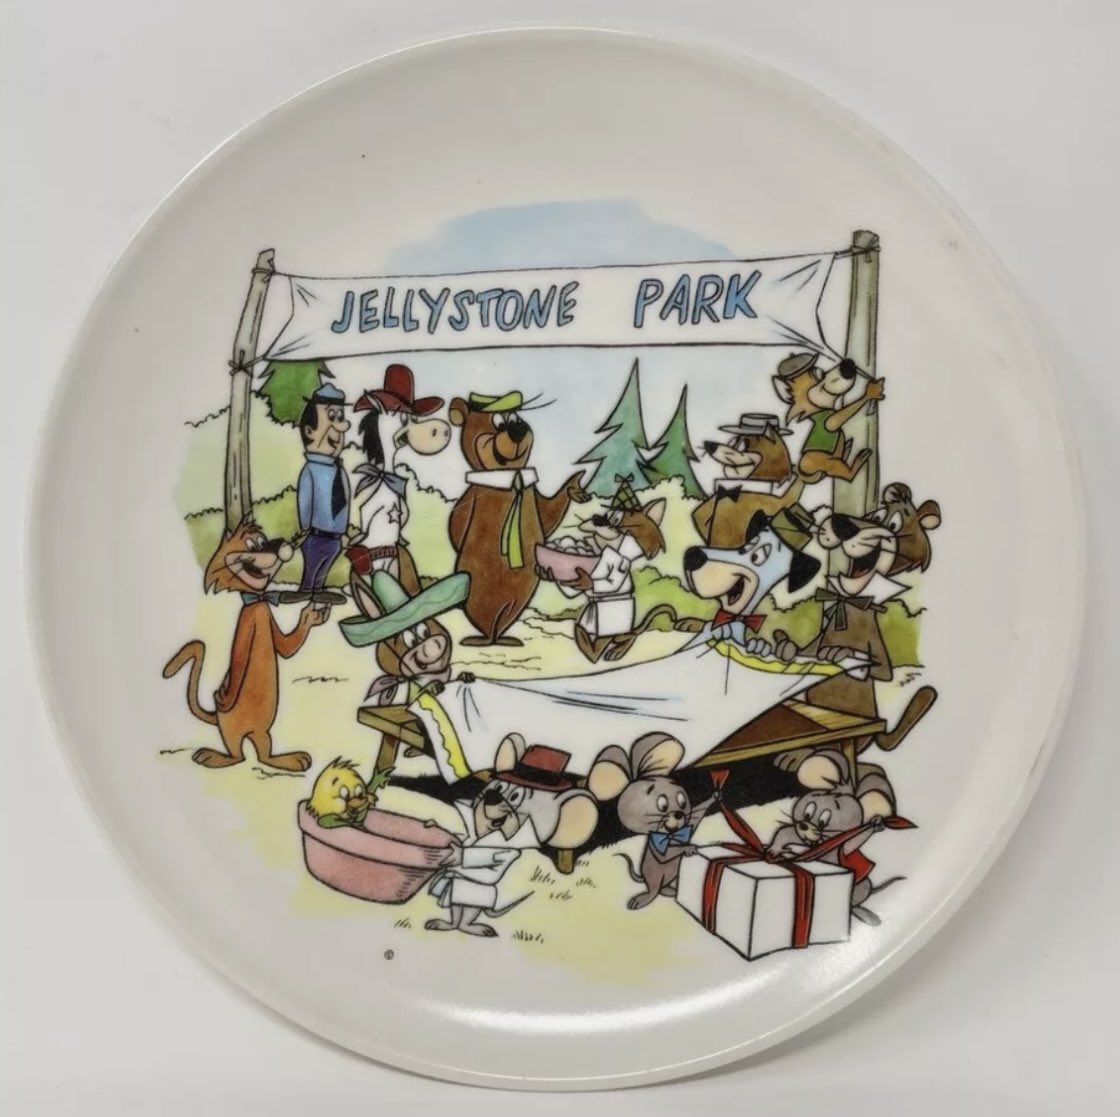 #hannabarbera A cool, vintage 60’s plate with Yogi and the gang 😁👌👍